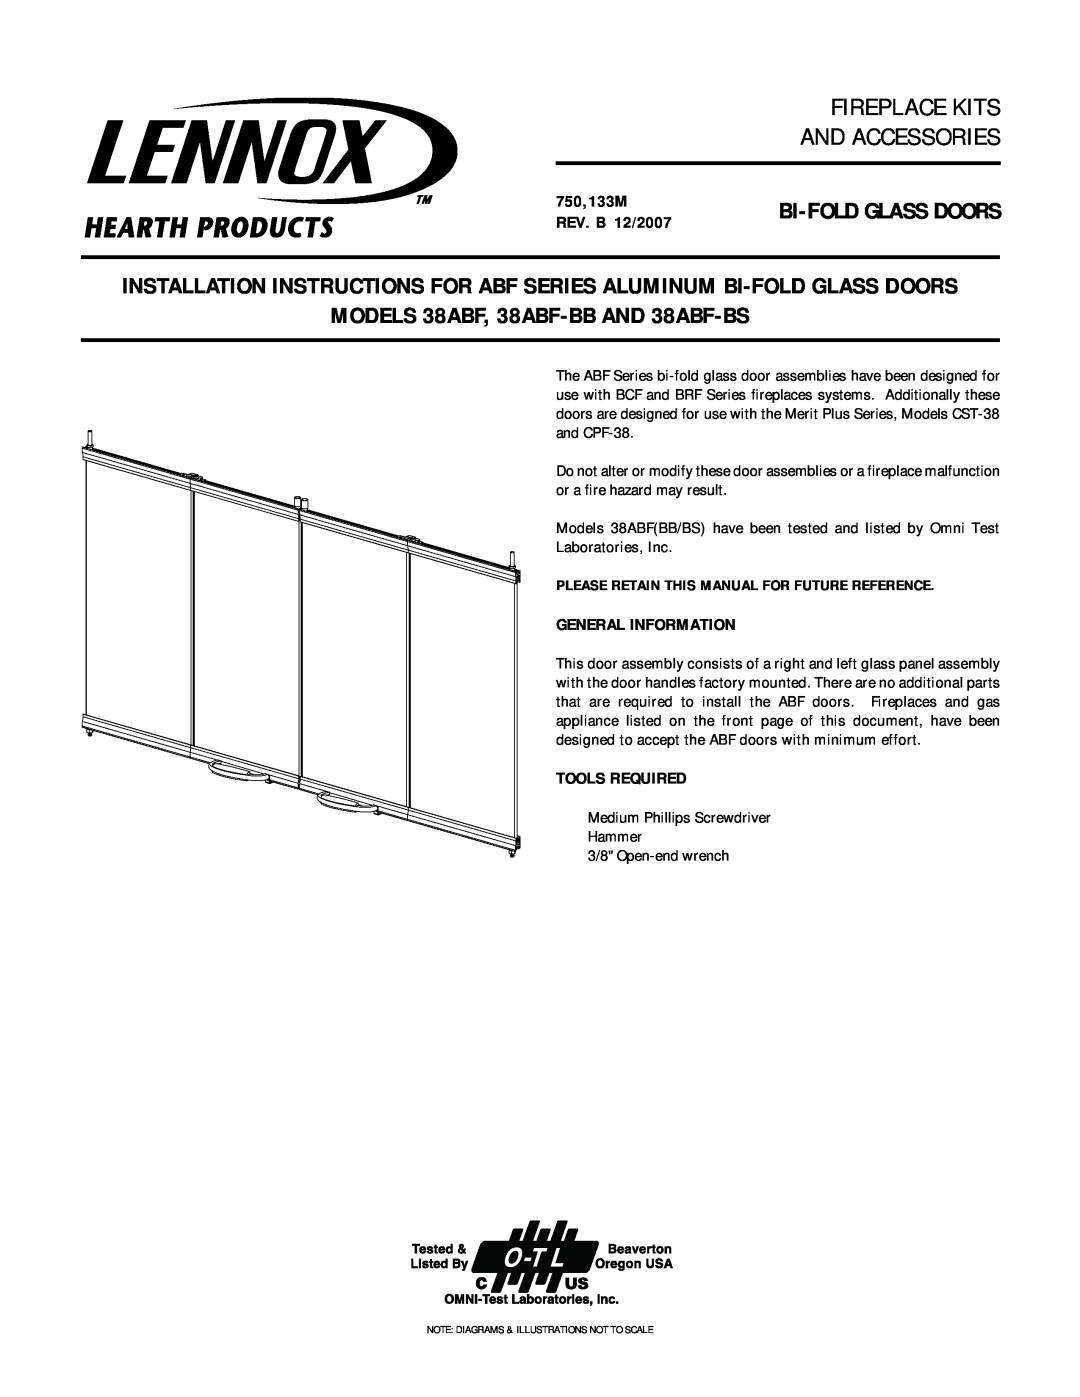 Lennox Hearth 38ABF-BB, 38ABF-BS installation instructions 750,133M REV. B 12/2007, General Information, Tools Required 